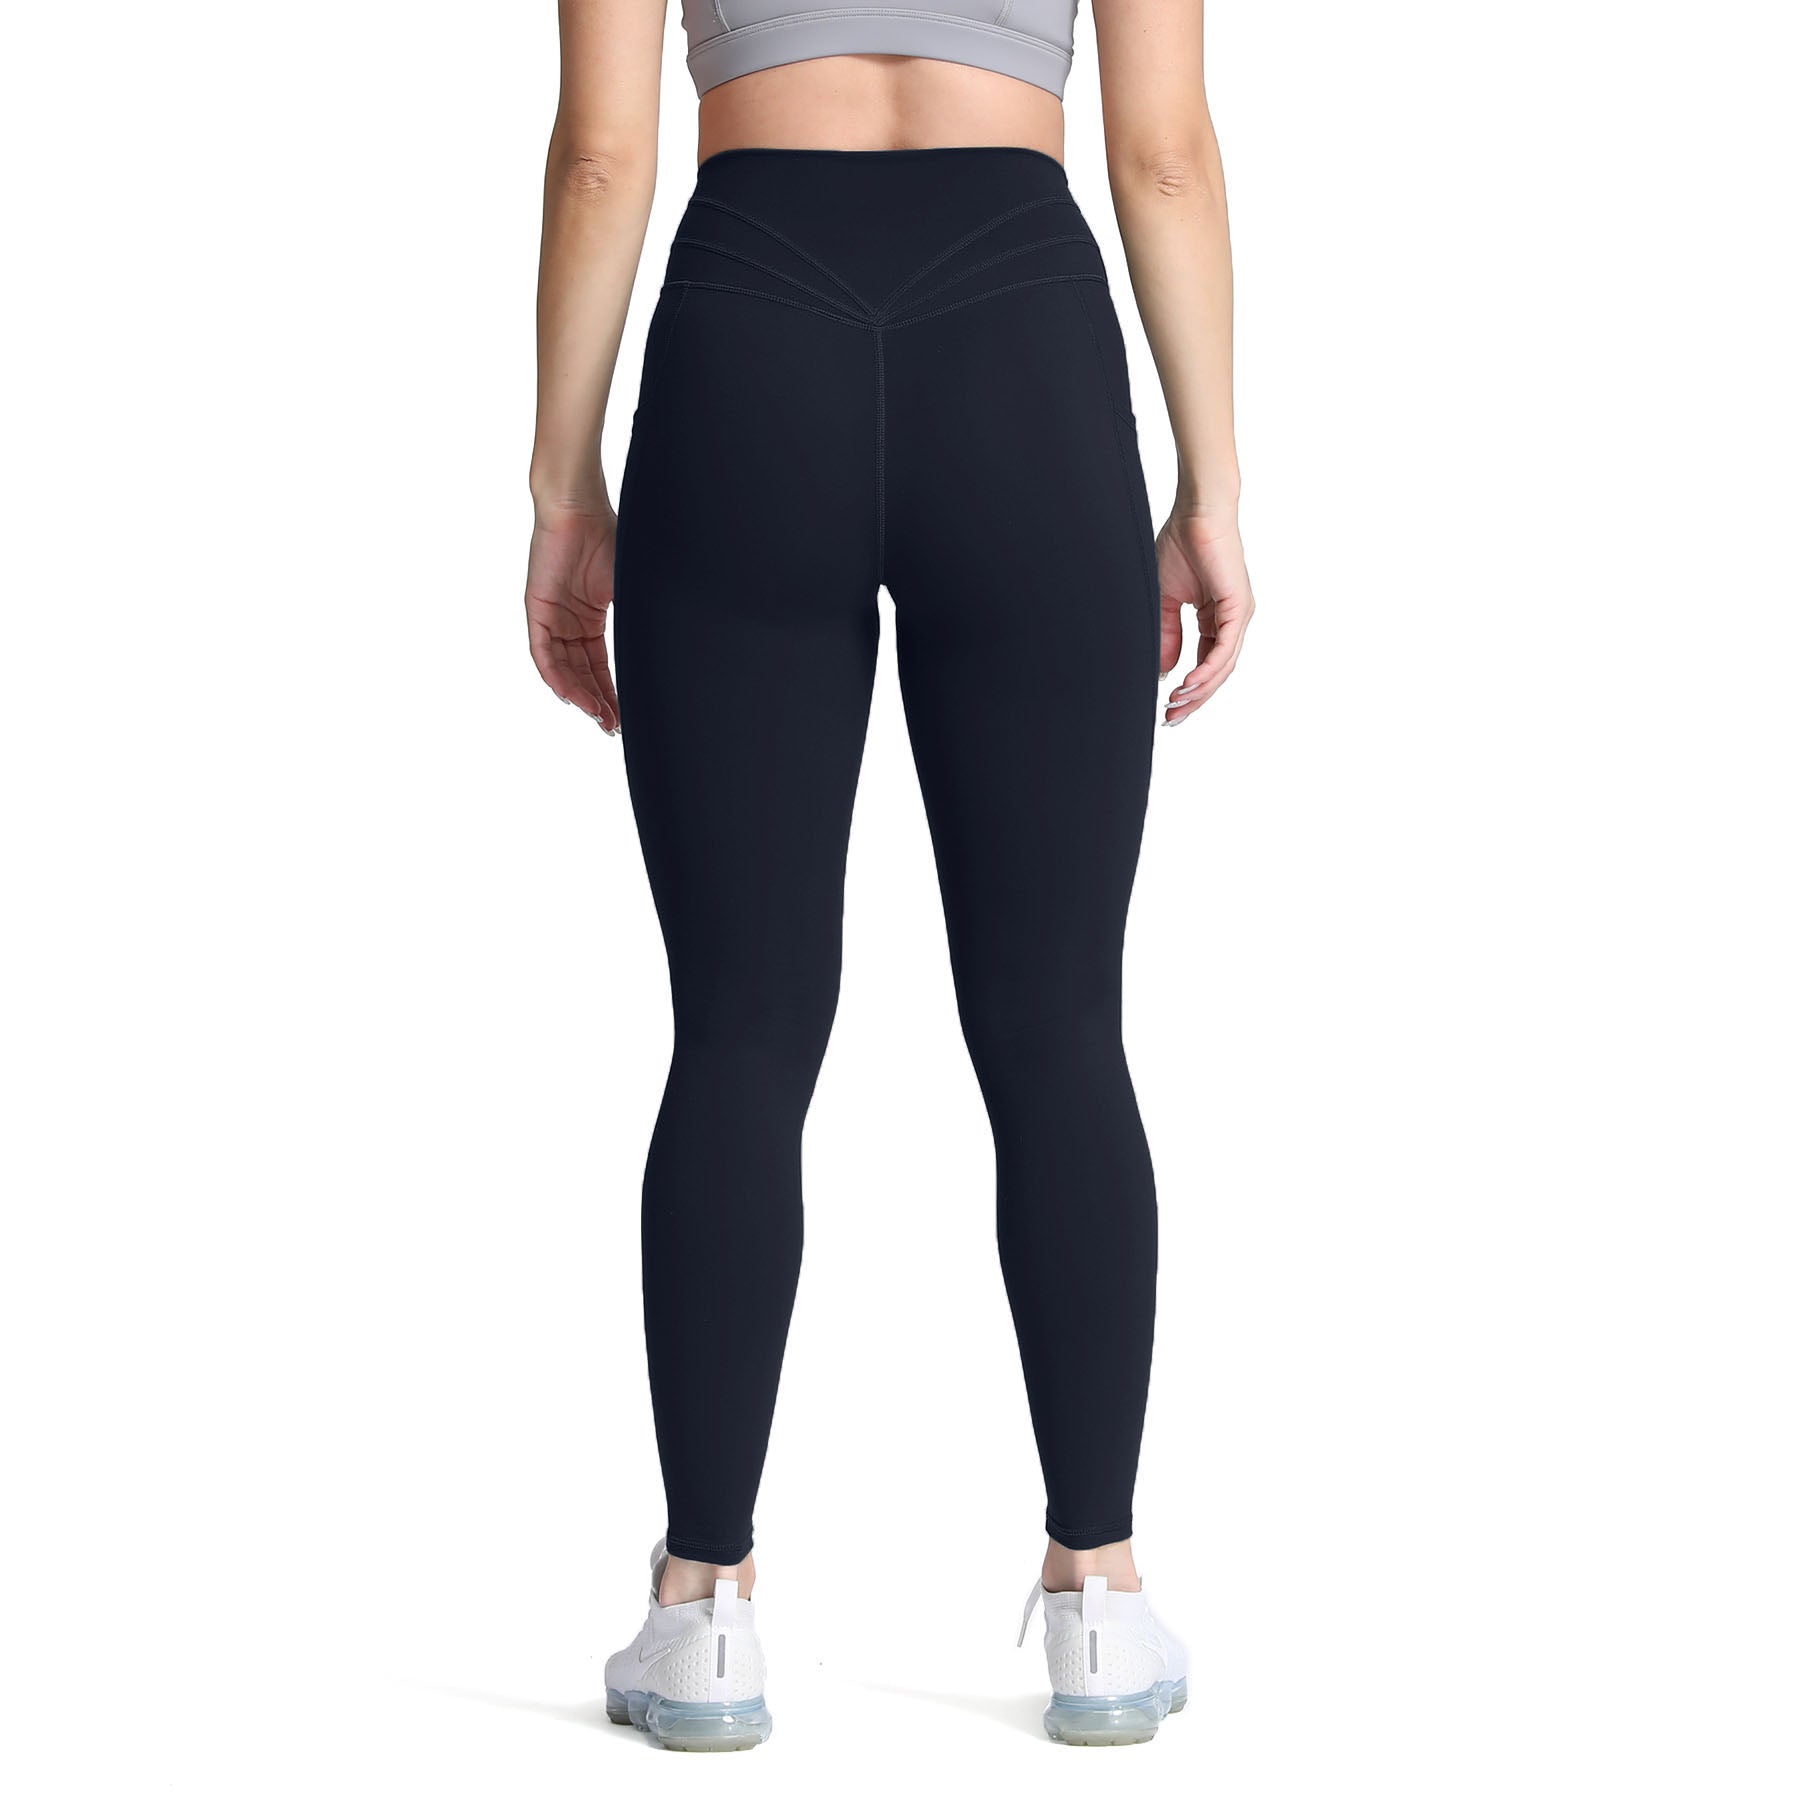 Aoxjox Yoga Pants for Women Workout High Waisted Gym Turkey